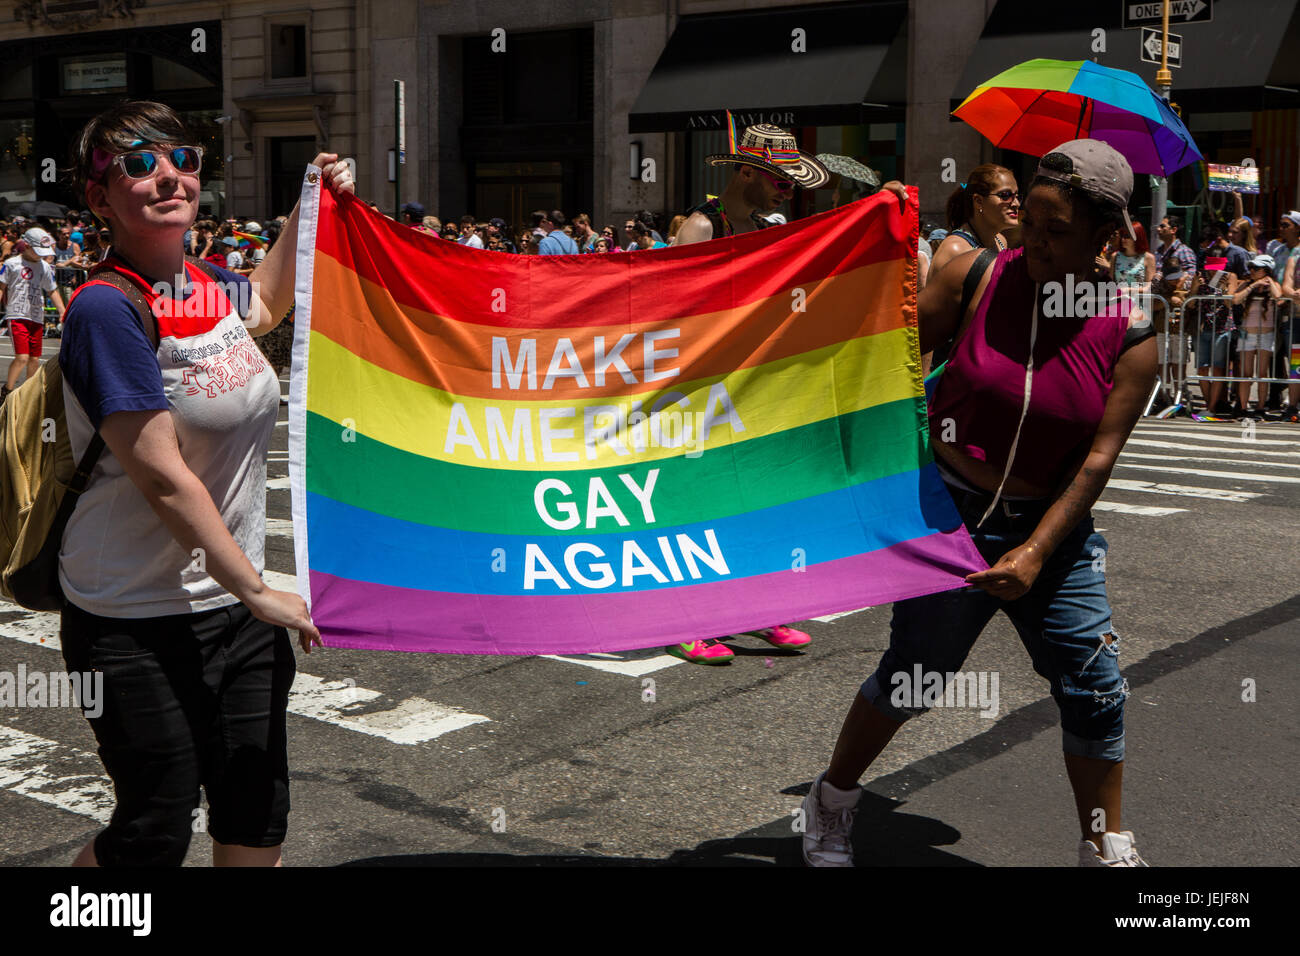 New York, USA. 25th June, 2017. New York City Heritage of Pride March filled Fifth Avenue for hours with groups from the LGBT community and it's supporters. Marchers carry a banner reading "Make America gay again," a dig at President Trump's campaign slogan. Credit: Ed Lefkowicz/Alamy Live News Stock Photo